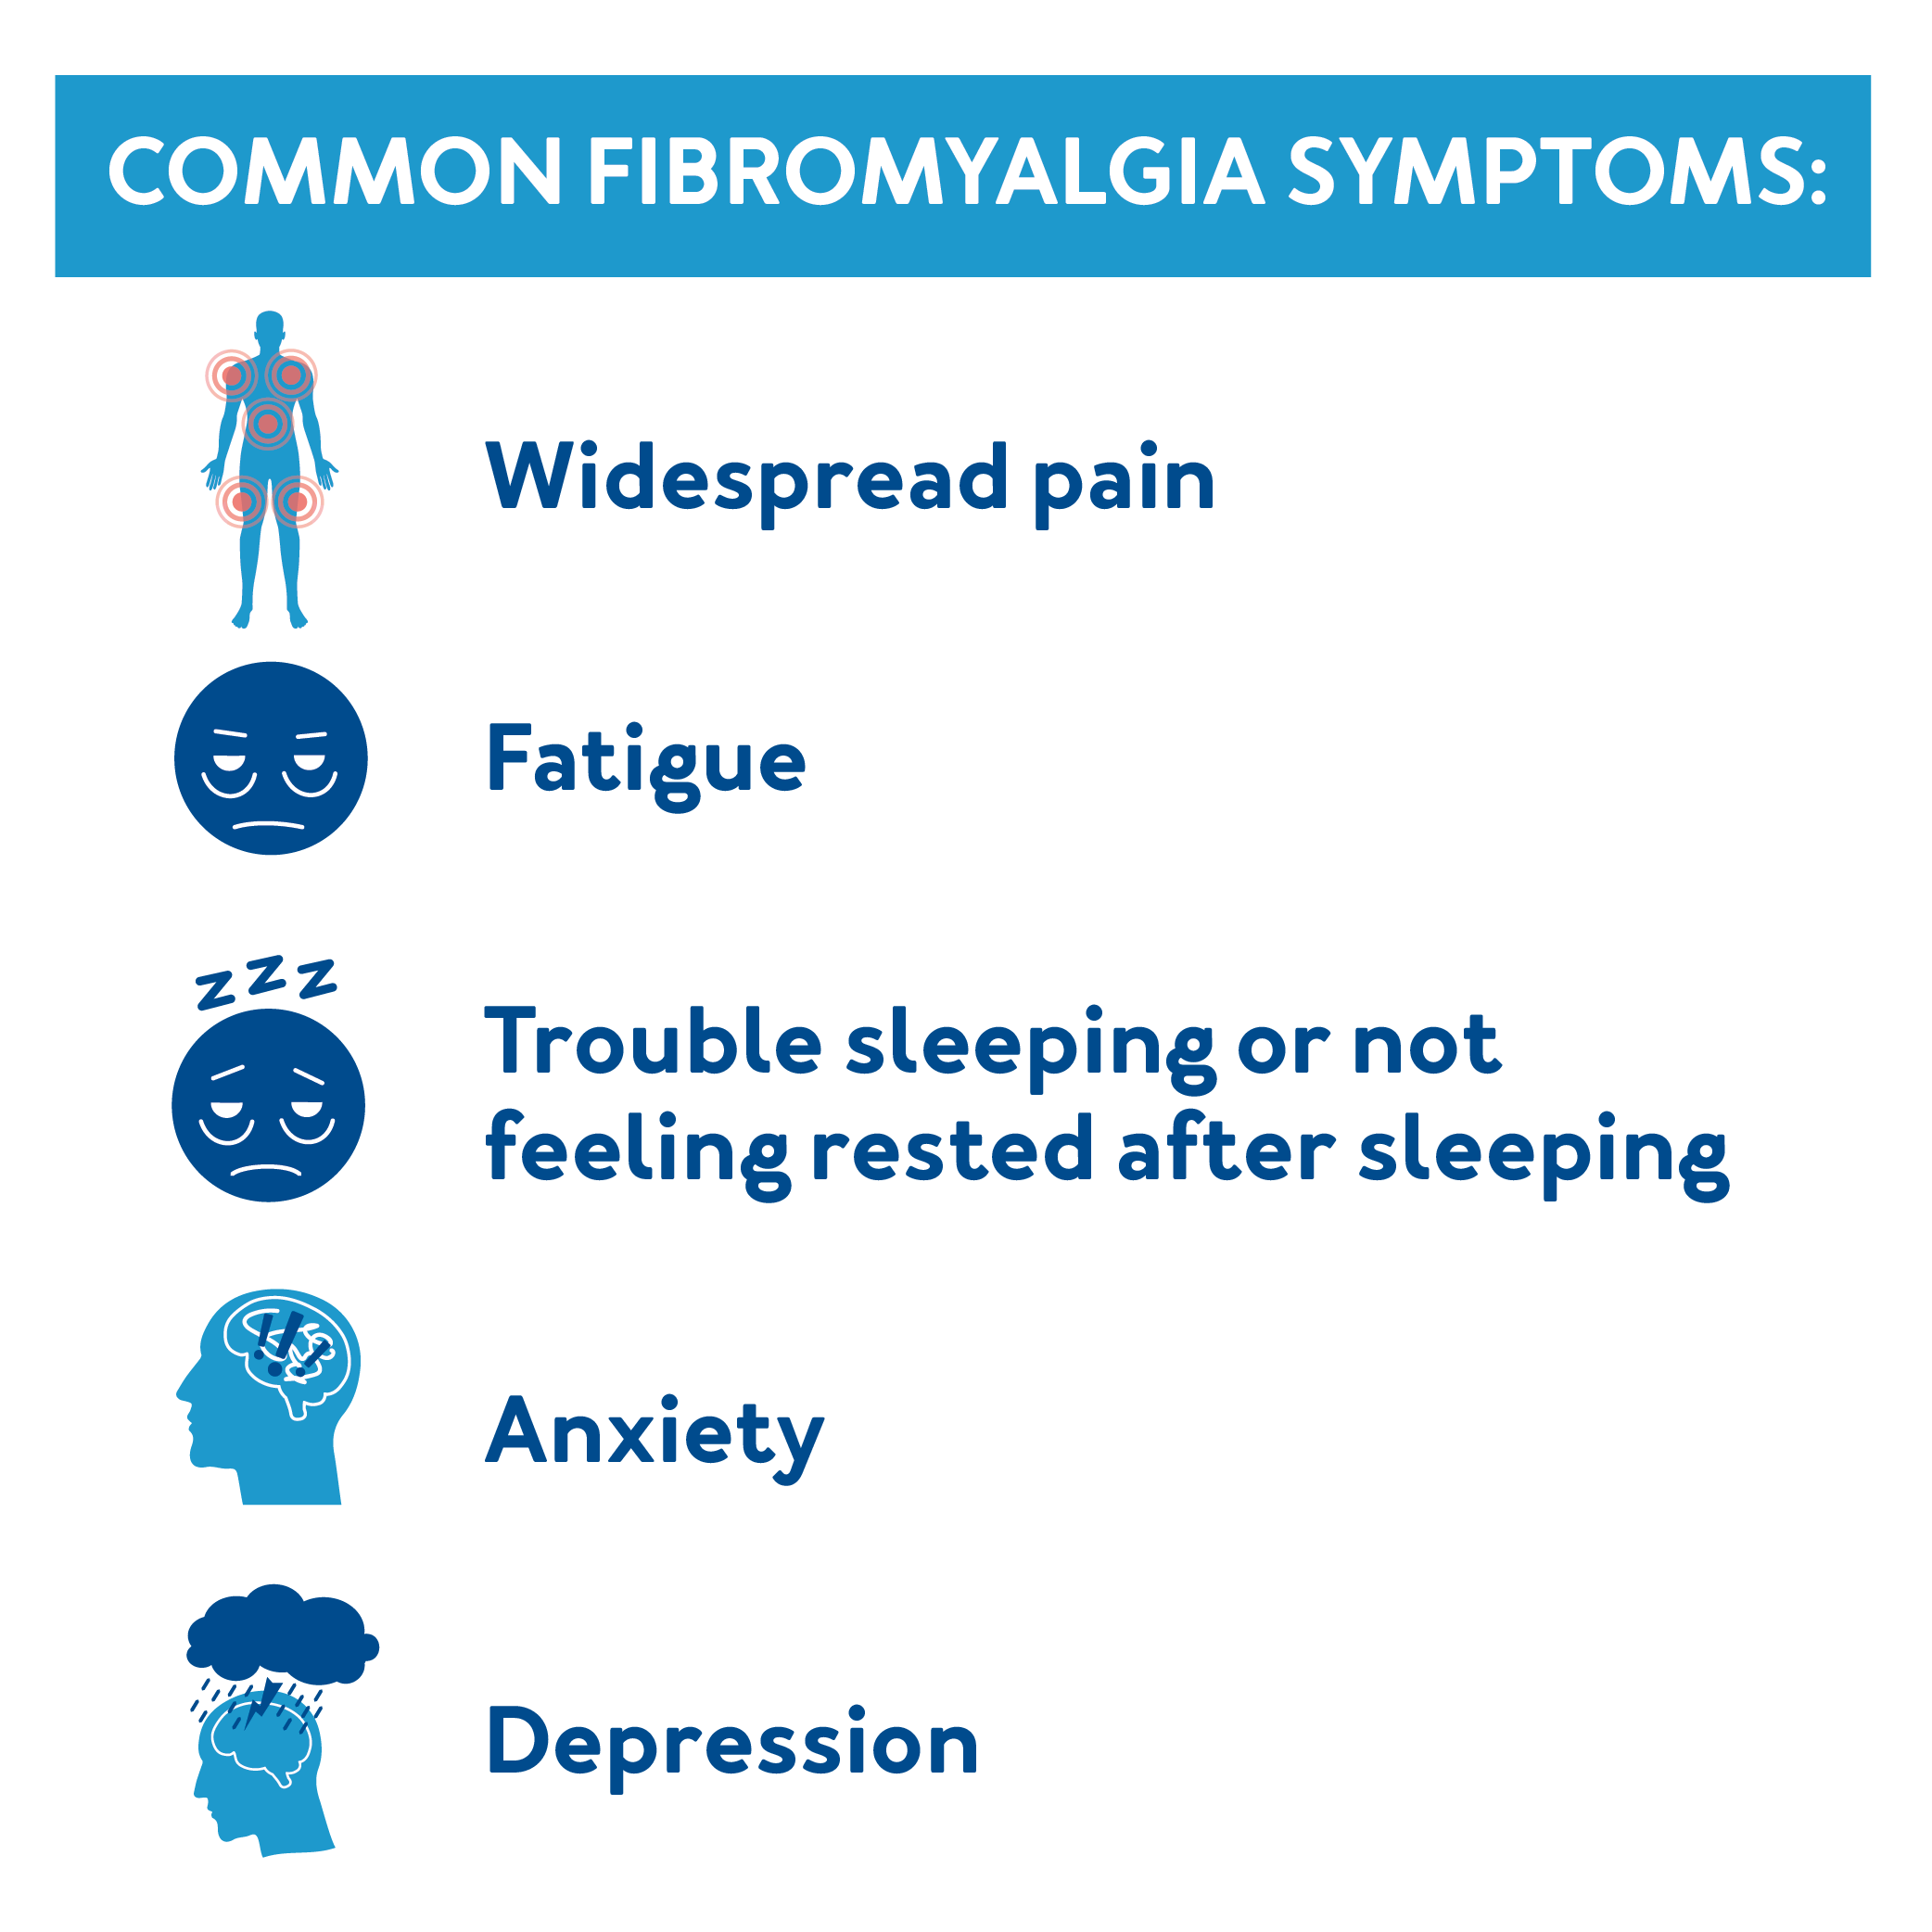 Fibromyalgia Support - Tips for communicating  http://www.prohealth.com/library/showarticle.cfm?libid=30636 - Facebook